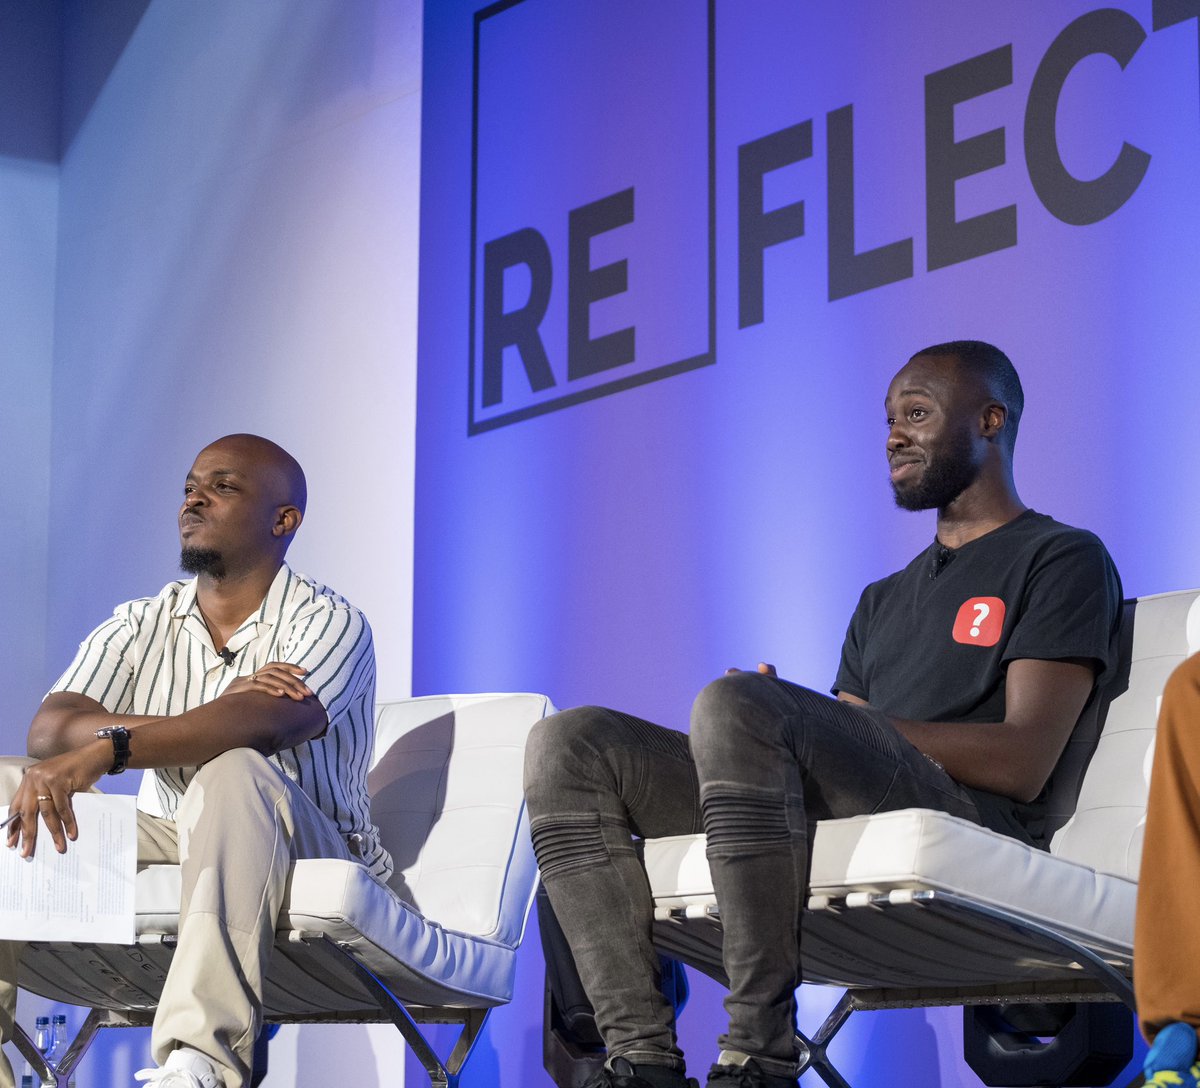 From KEYNOTE SPEAKER to EVENT HOST!! 🎤🤩 This time last year, I spoke to 200+ young people at REflect 2022, one of the most anticipated STEM events of the year. The young people loved it. So much that I’ll be back to host this year! 🙏🏾 Let’s go! 🚀 bit.ly/MotivezxRS